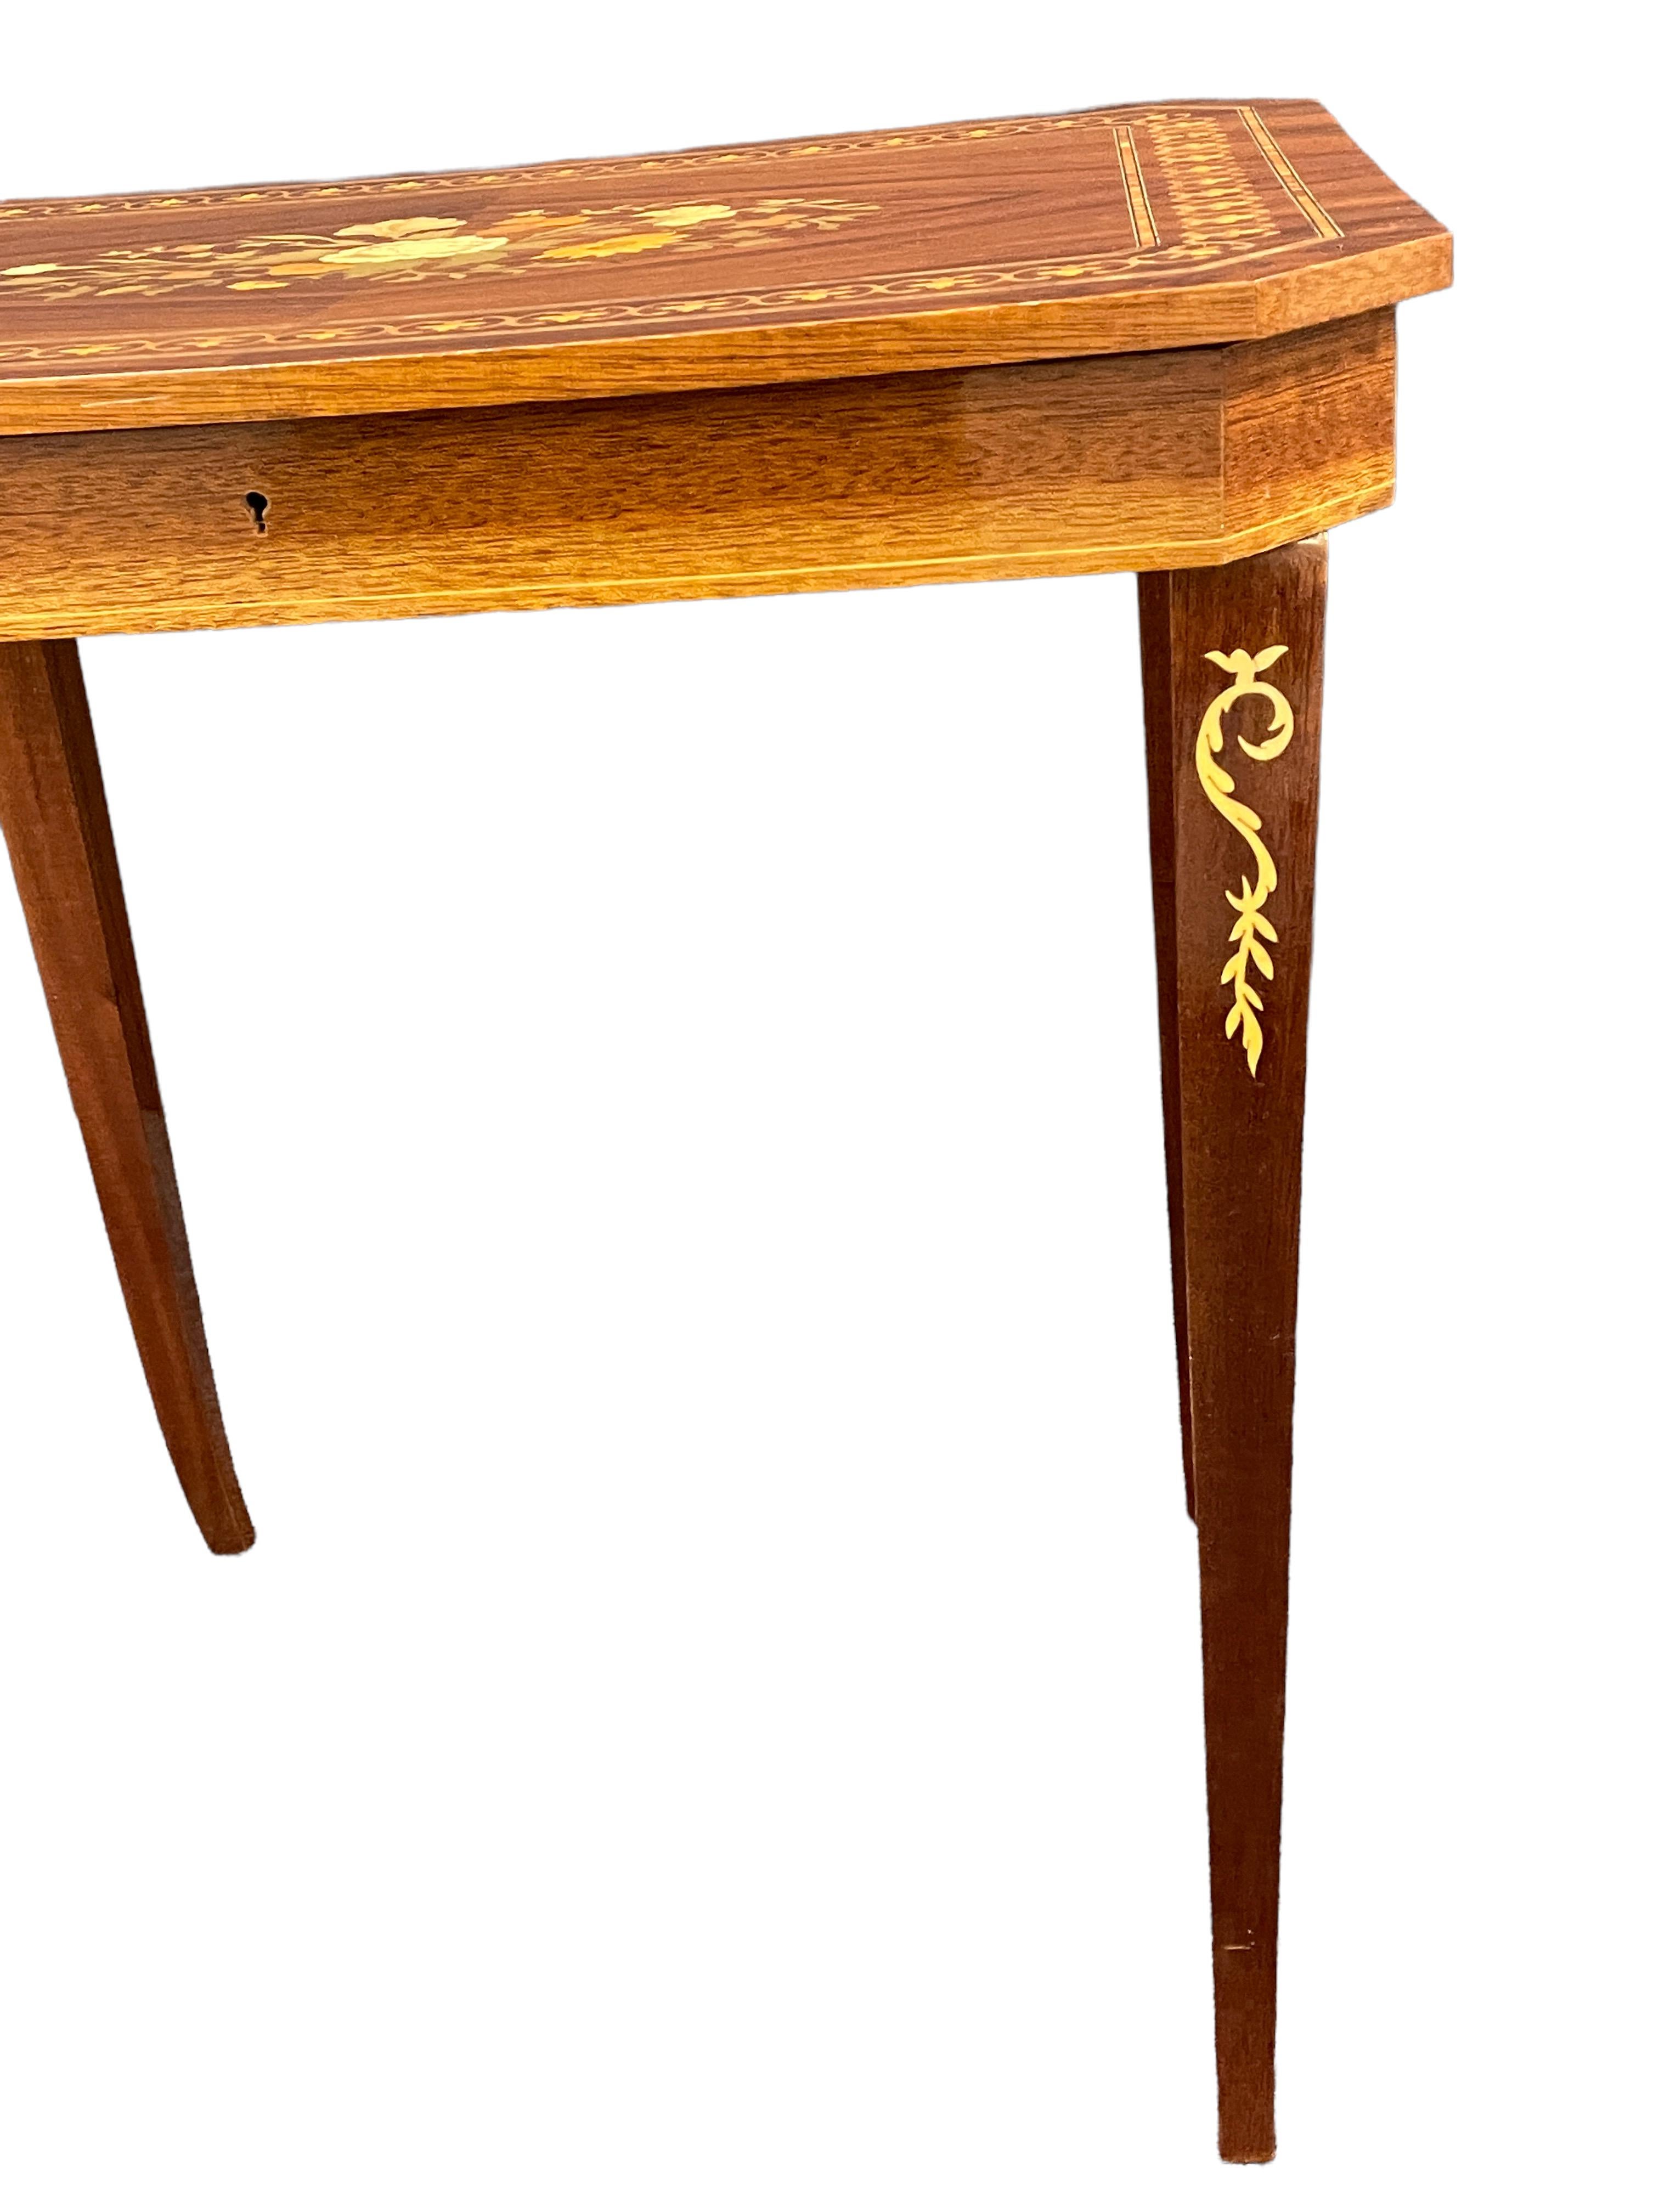 20th Century Small Inlaid Side Table with Jewelry Compartment and Music Box For Sale 3